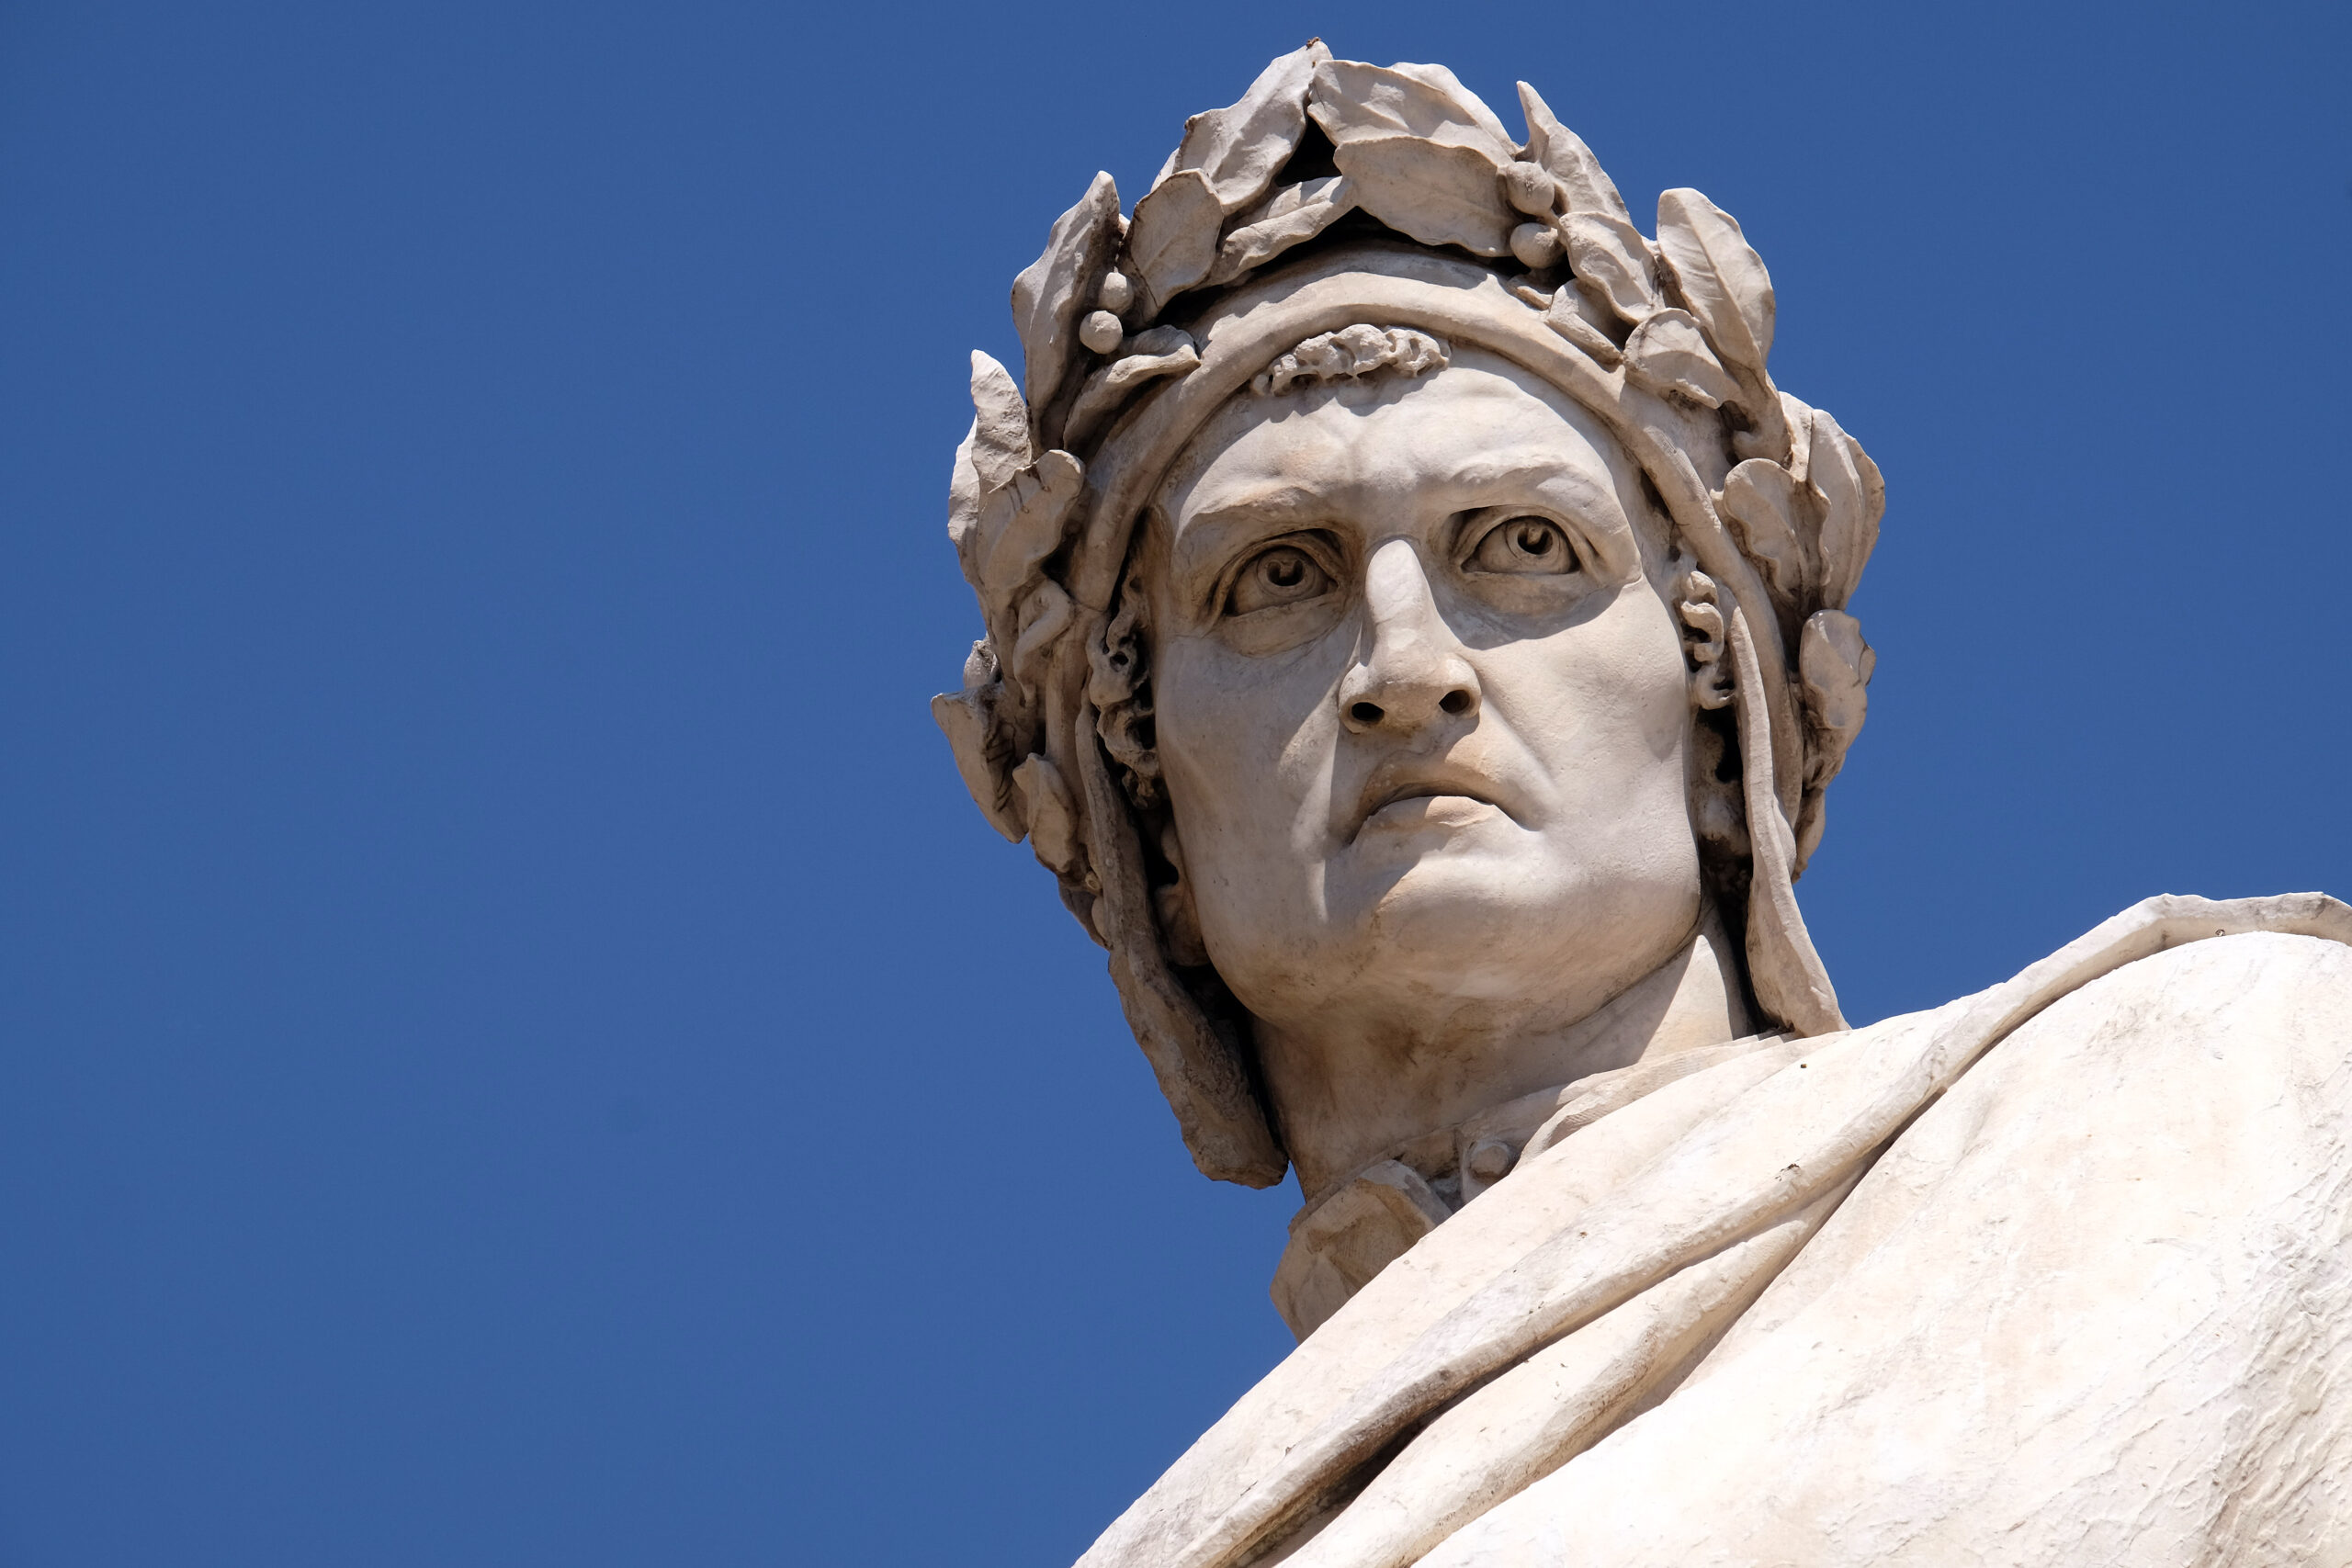 A statue of Dante Alighieri, the poet. It is an up close shot of his face with a blue sky backdrop.